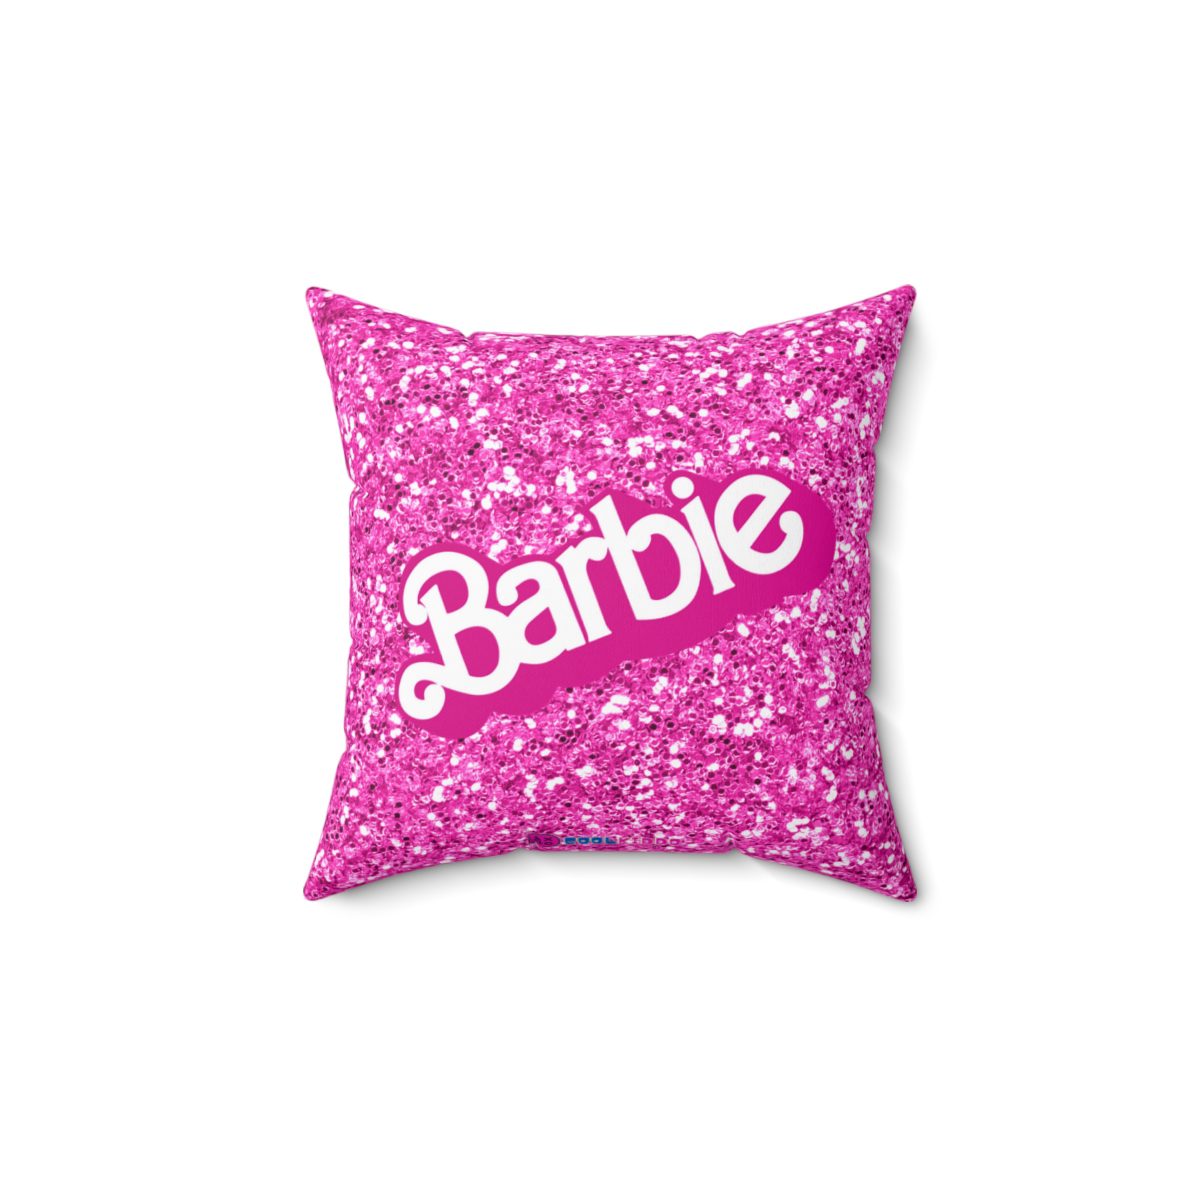 Barbie Glitter Simulation Pink Cushion: Double-Sided Sparkle for Stylish Comfort Cool Kiddo 16